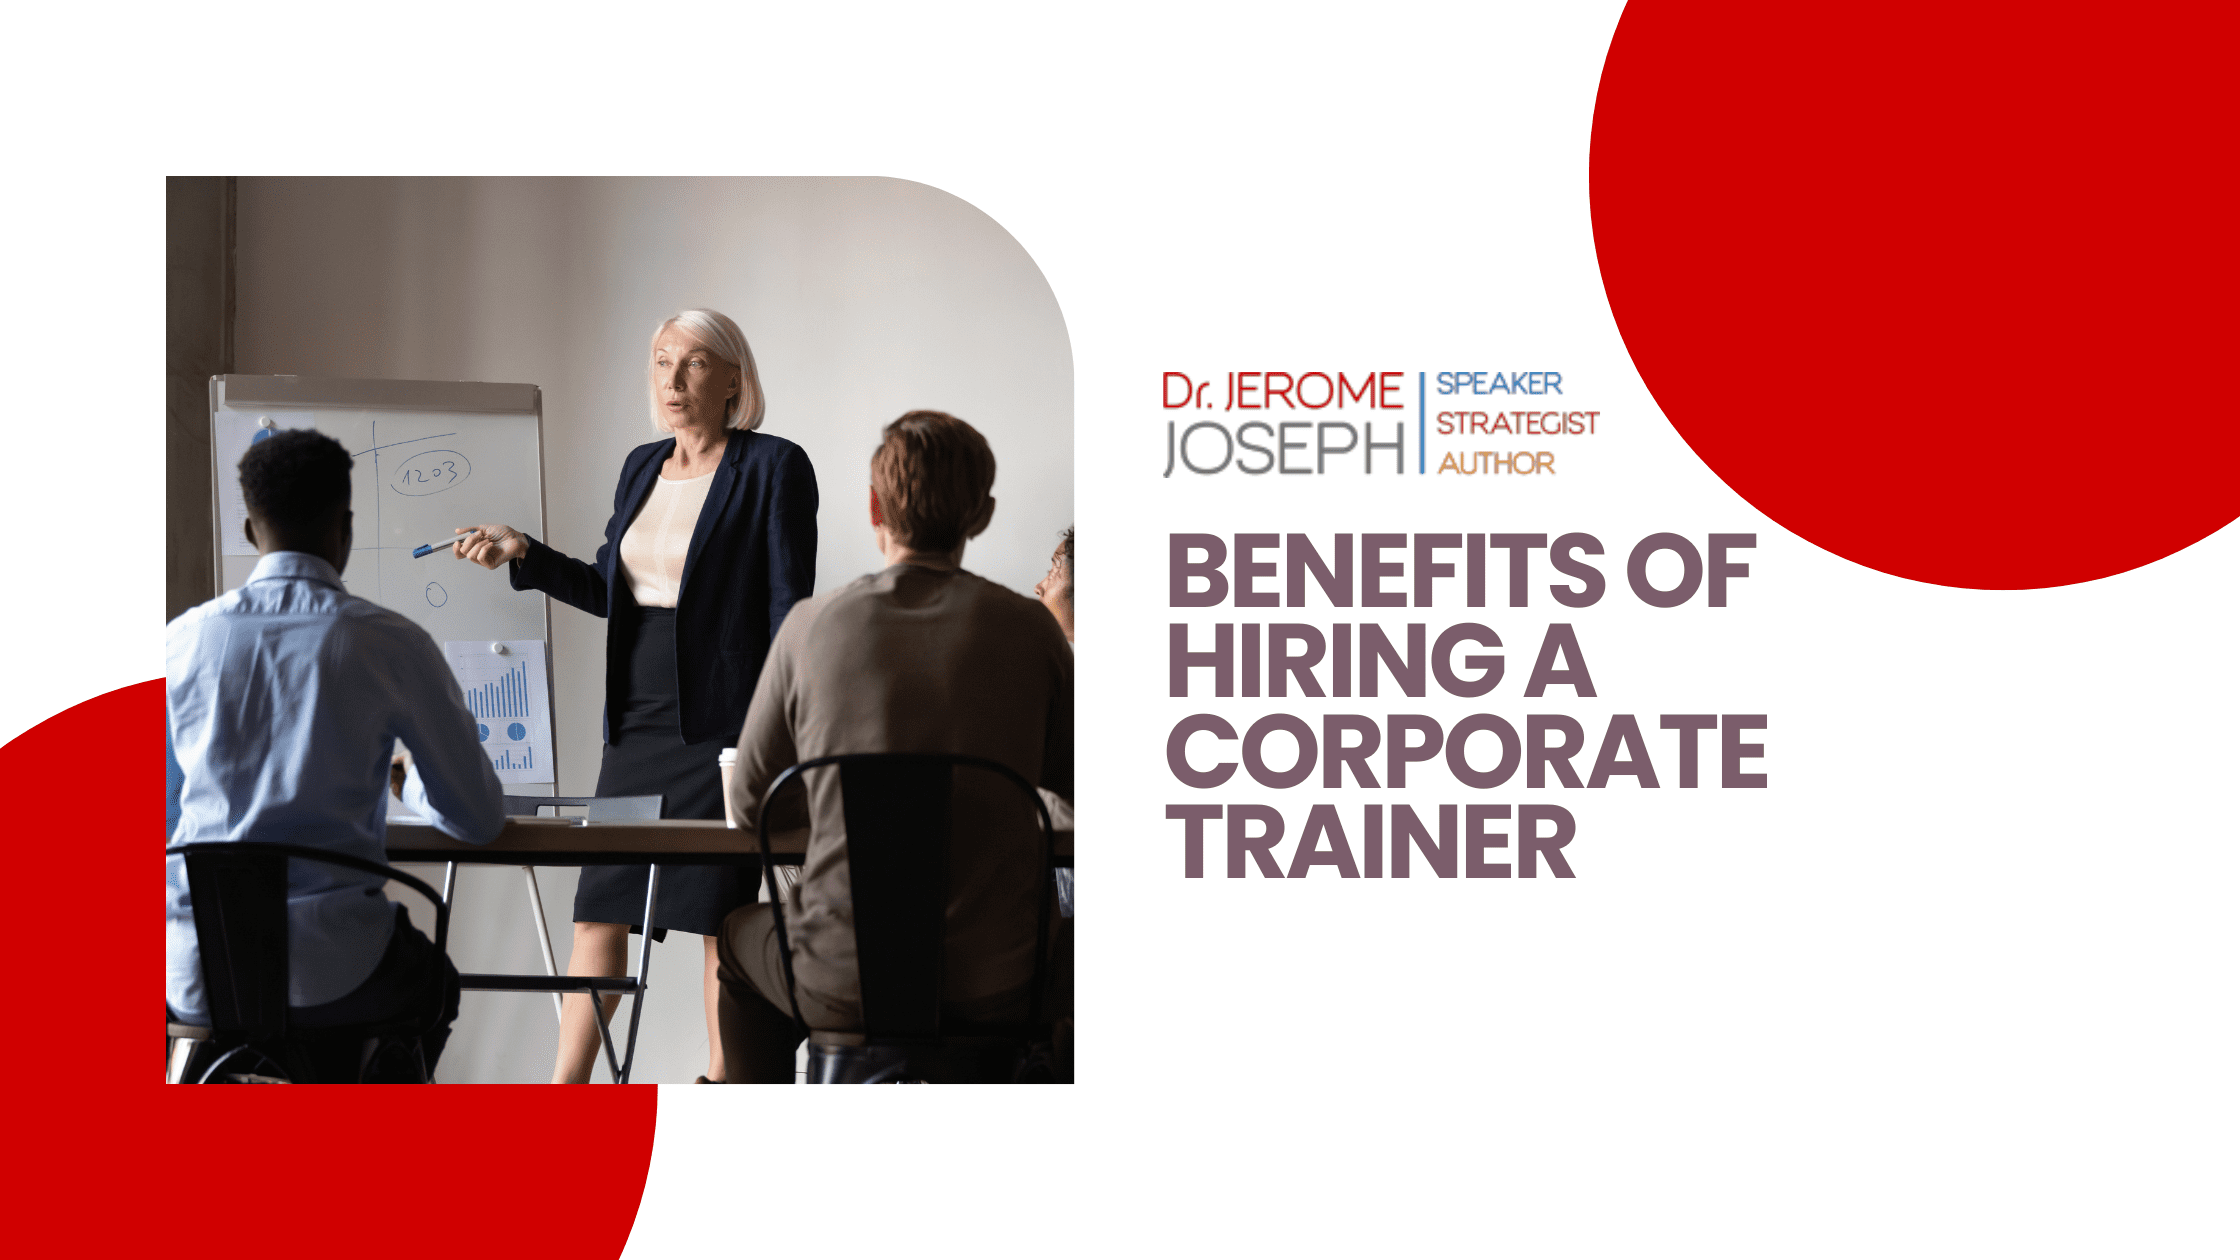 Benefits of Hiring a Corporate Trainer